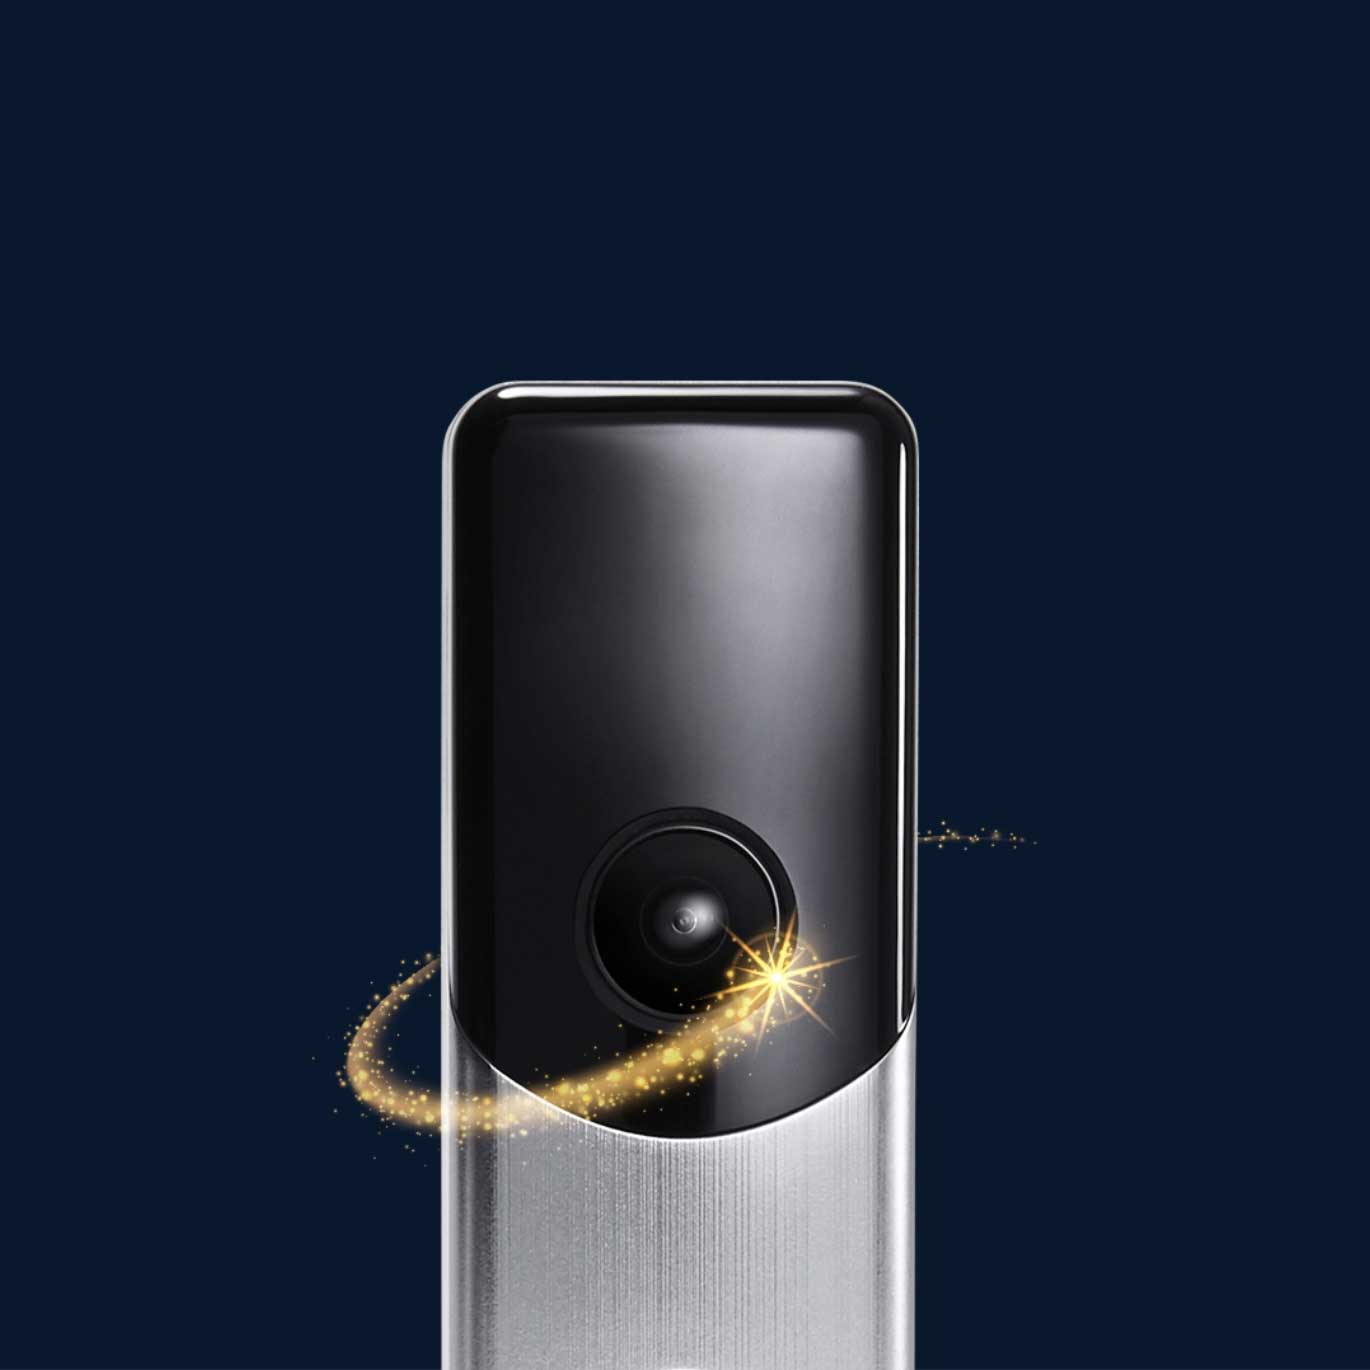 Ring doorbell with shooting star graphic surrounding it